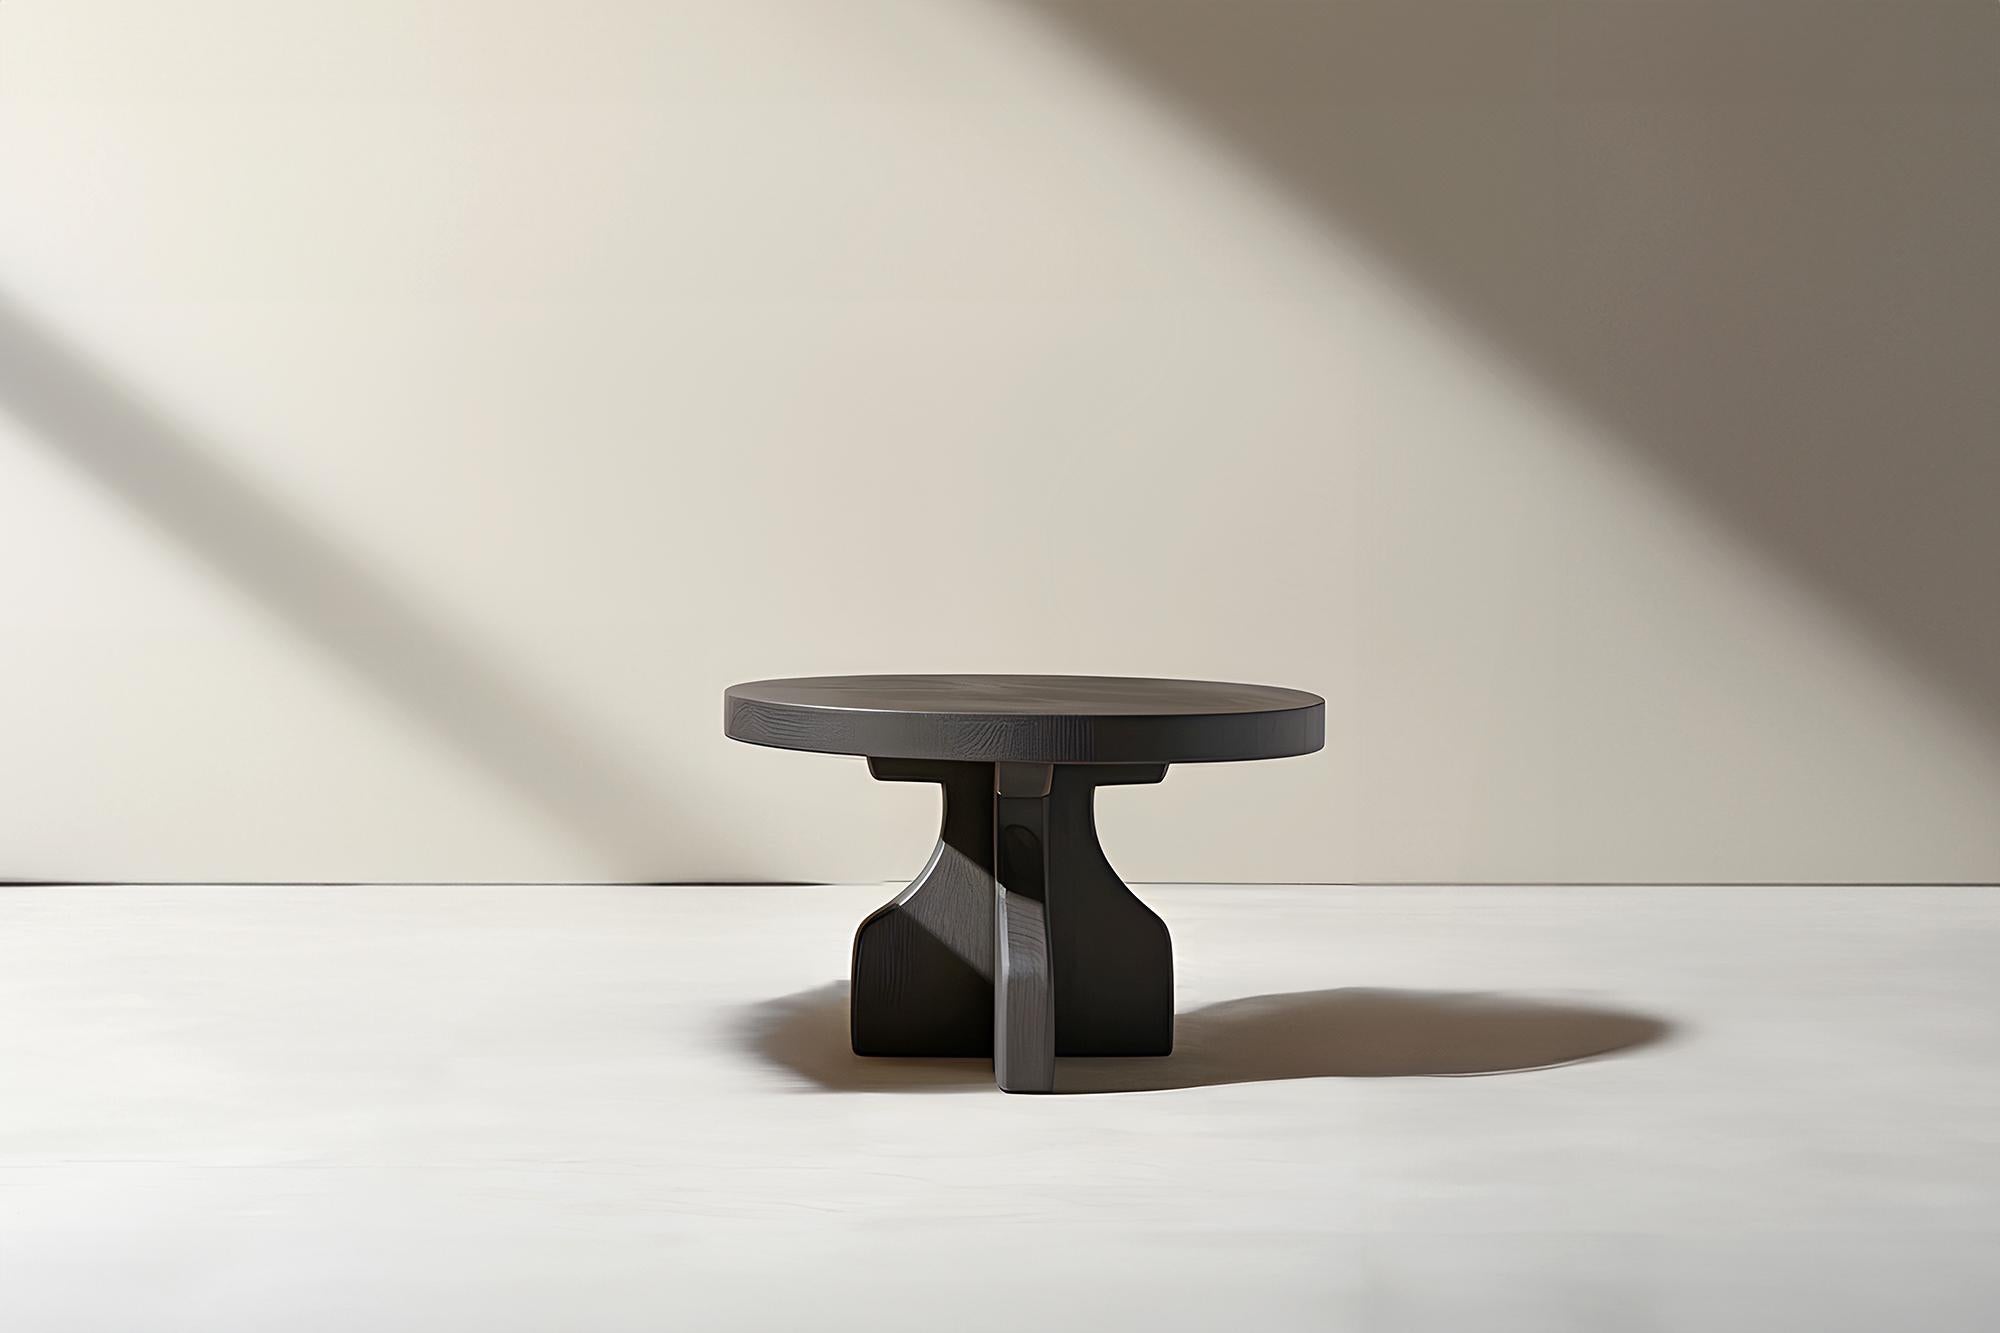 Fundamenta Round Side Table 49 Solid Wood, Geometric Elegance by NONO


Sculptural coffee table made of solid wood with a natural water-based or black tinted finish. Due to the nature of the production process, each piece may vary in grain, texture,